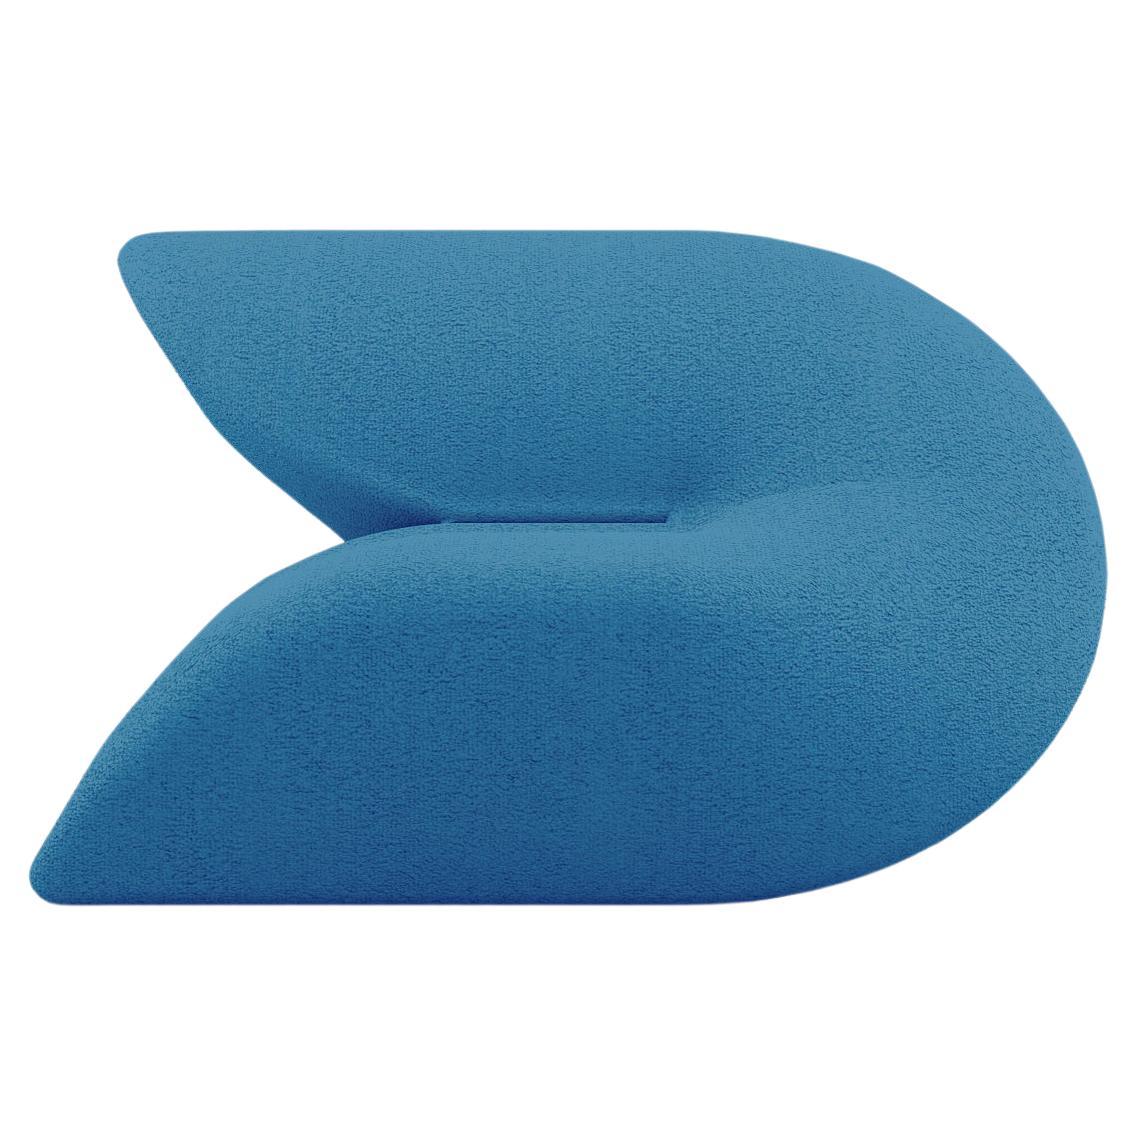 Delta Armchair - Modern Classic Blue Upholstered Armchair For Sale